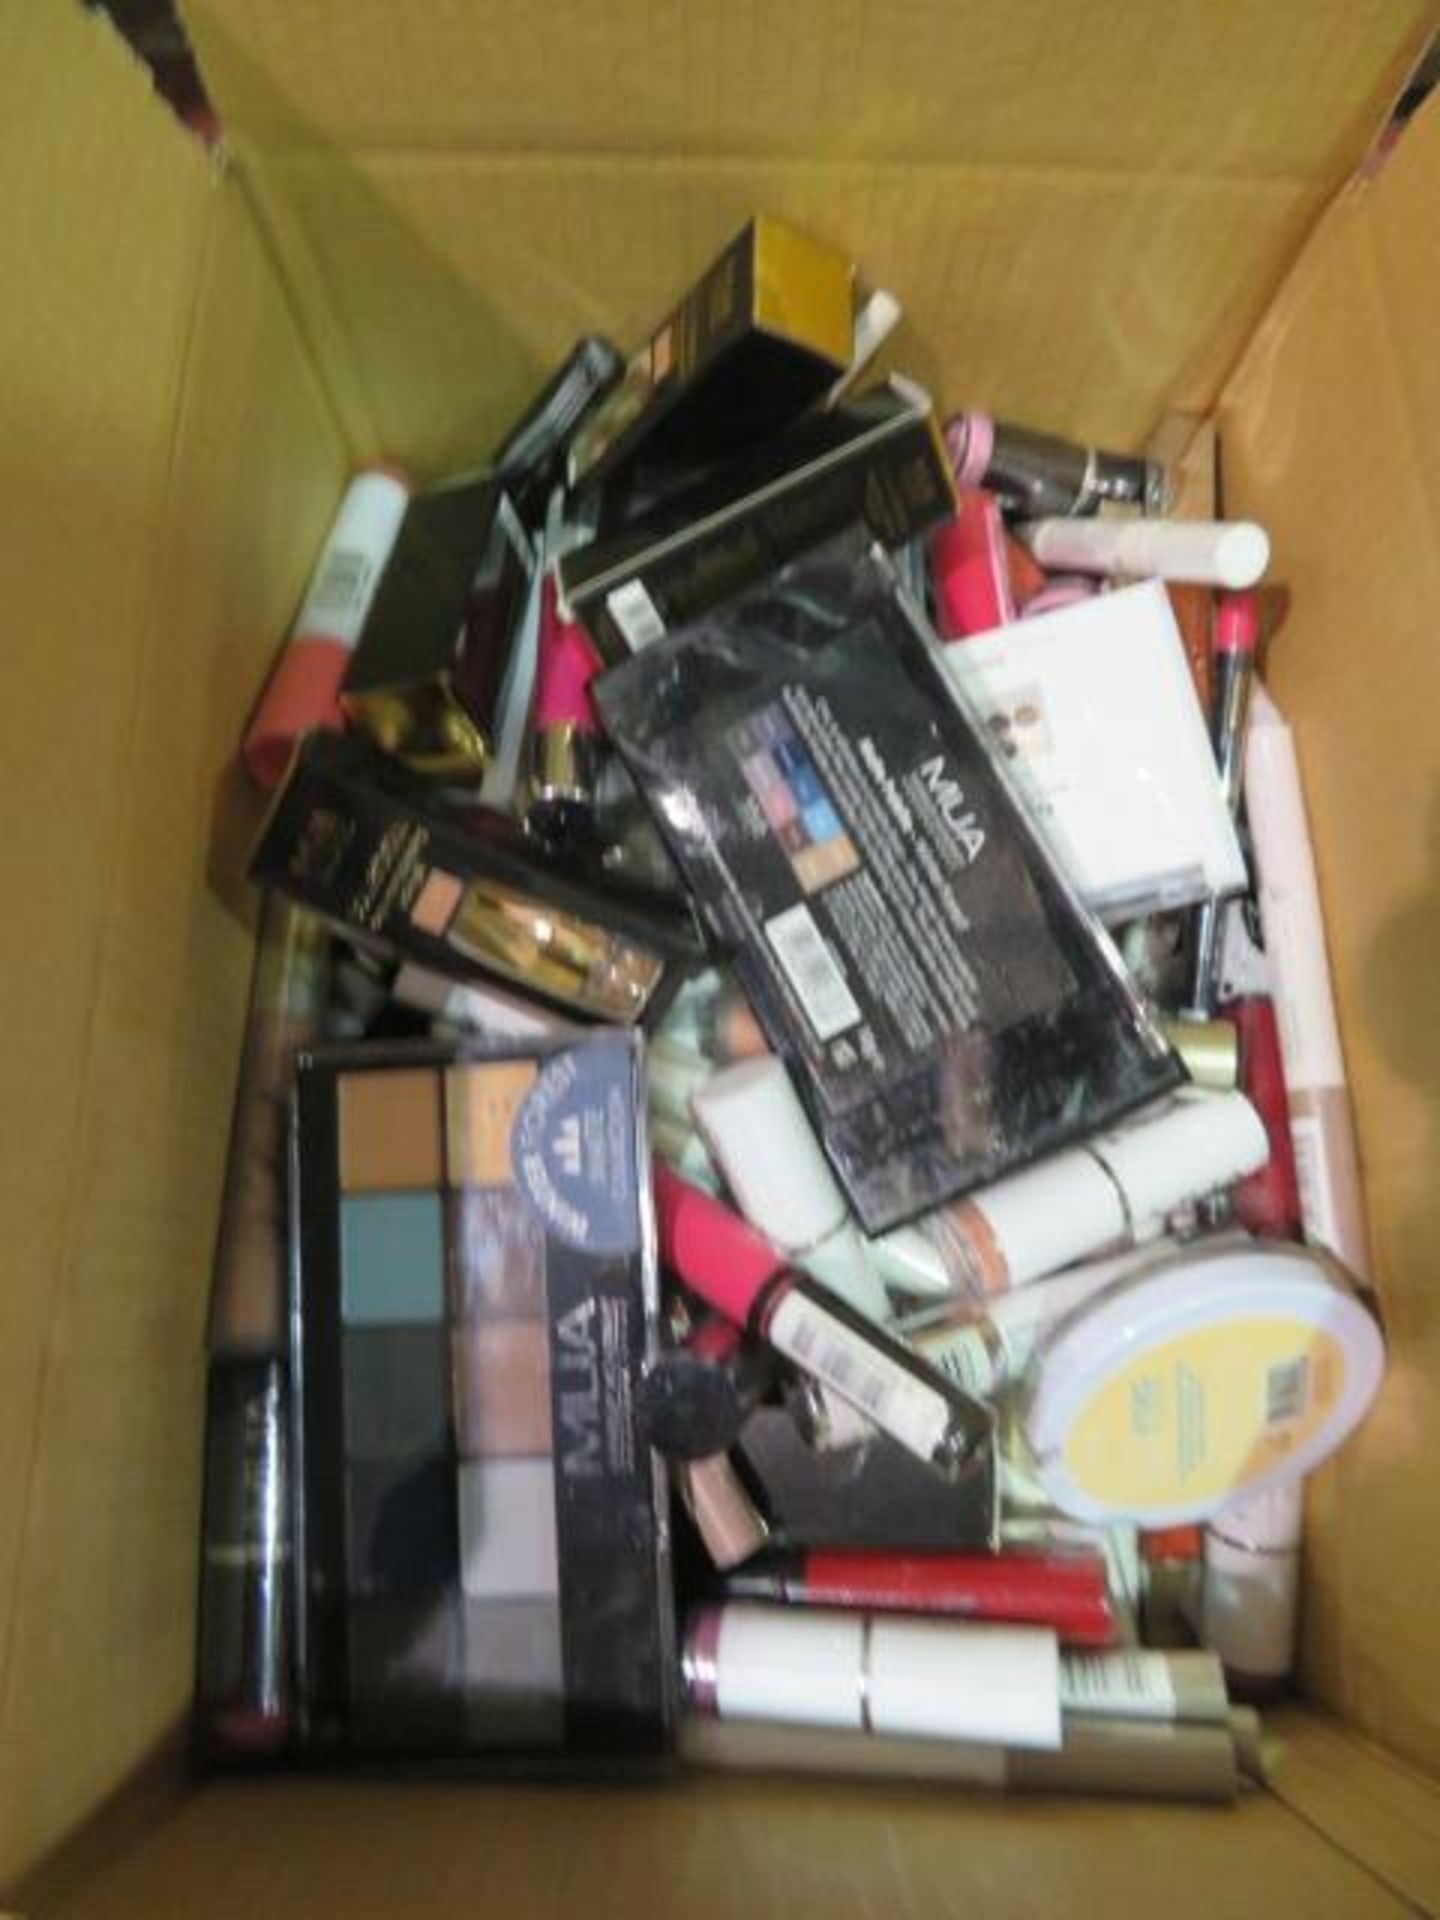 Circa. 200 items of various new make up acadamy make up to include: skin define hydro powder, p...